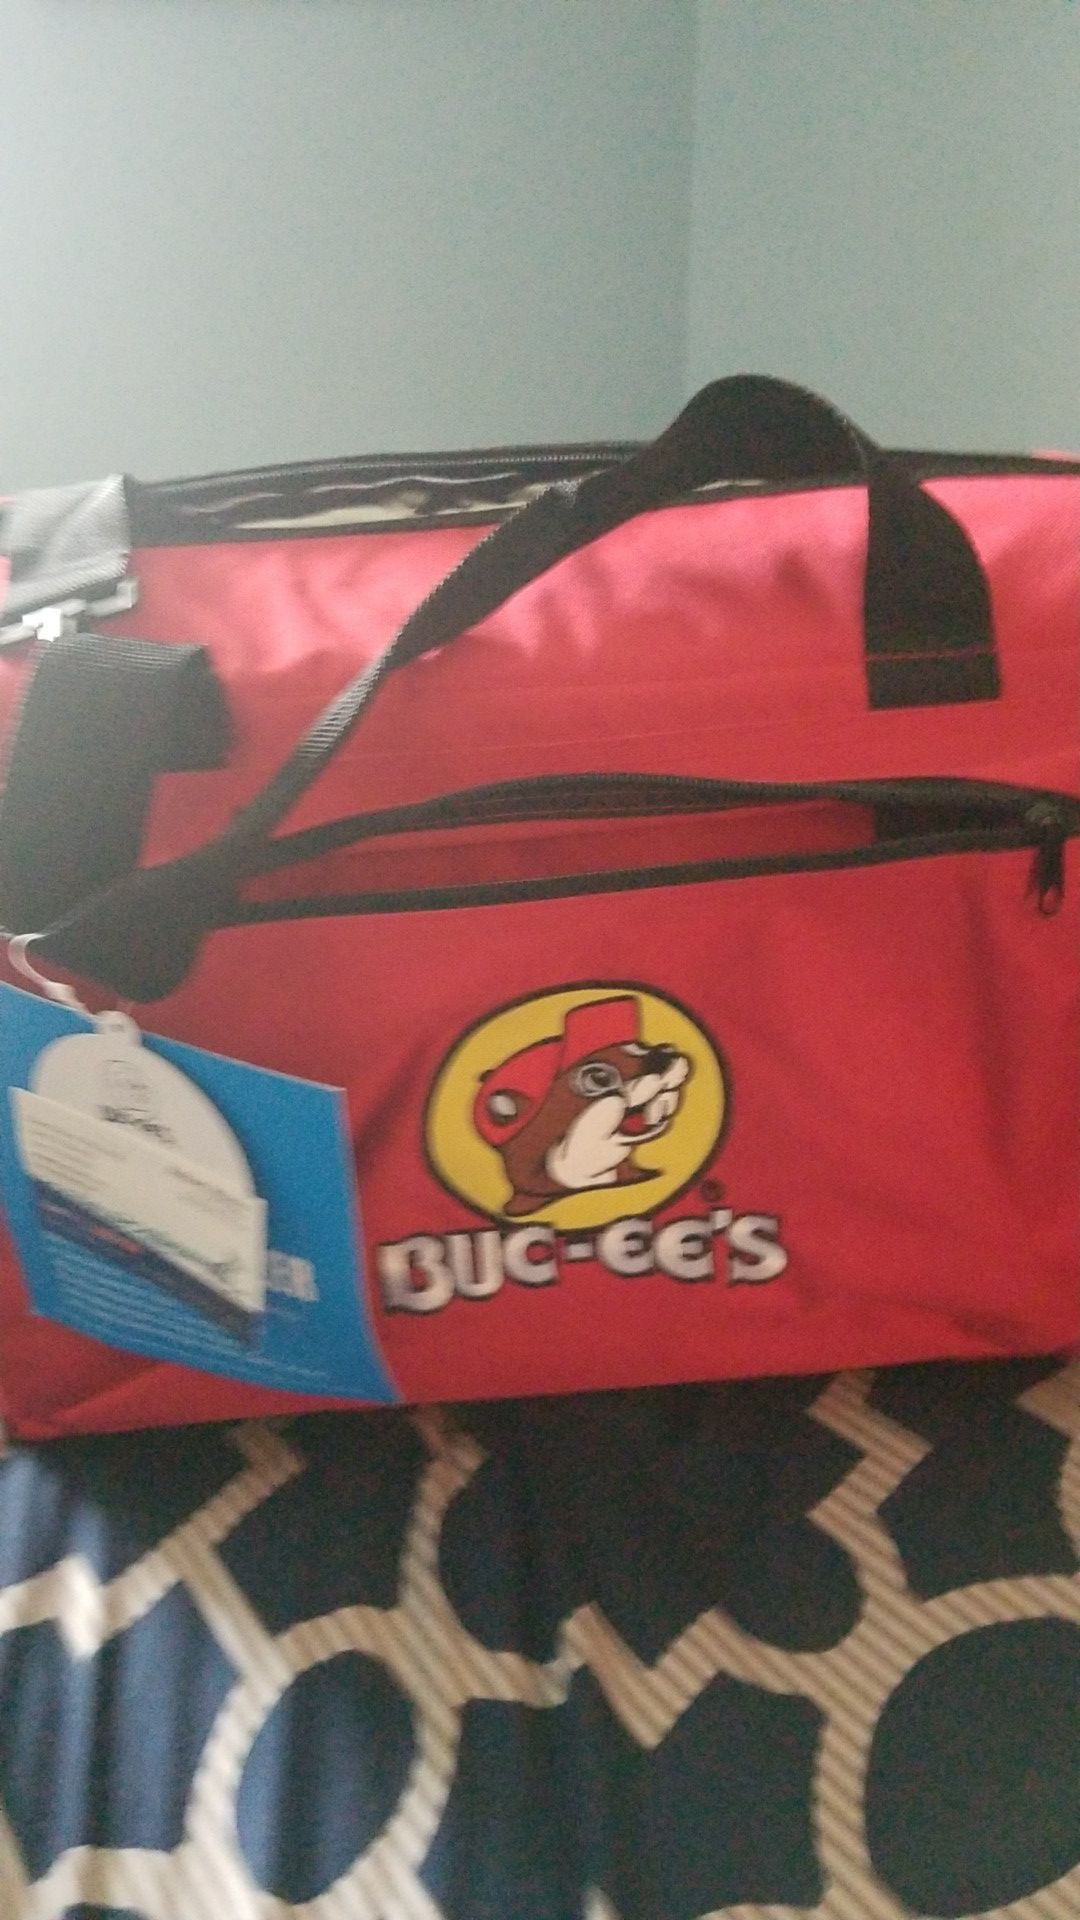 BRAND NEW BUC-EE'S 24 CAN COOLER BAG